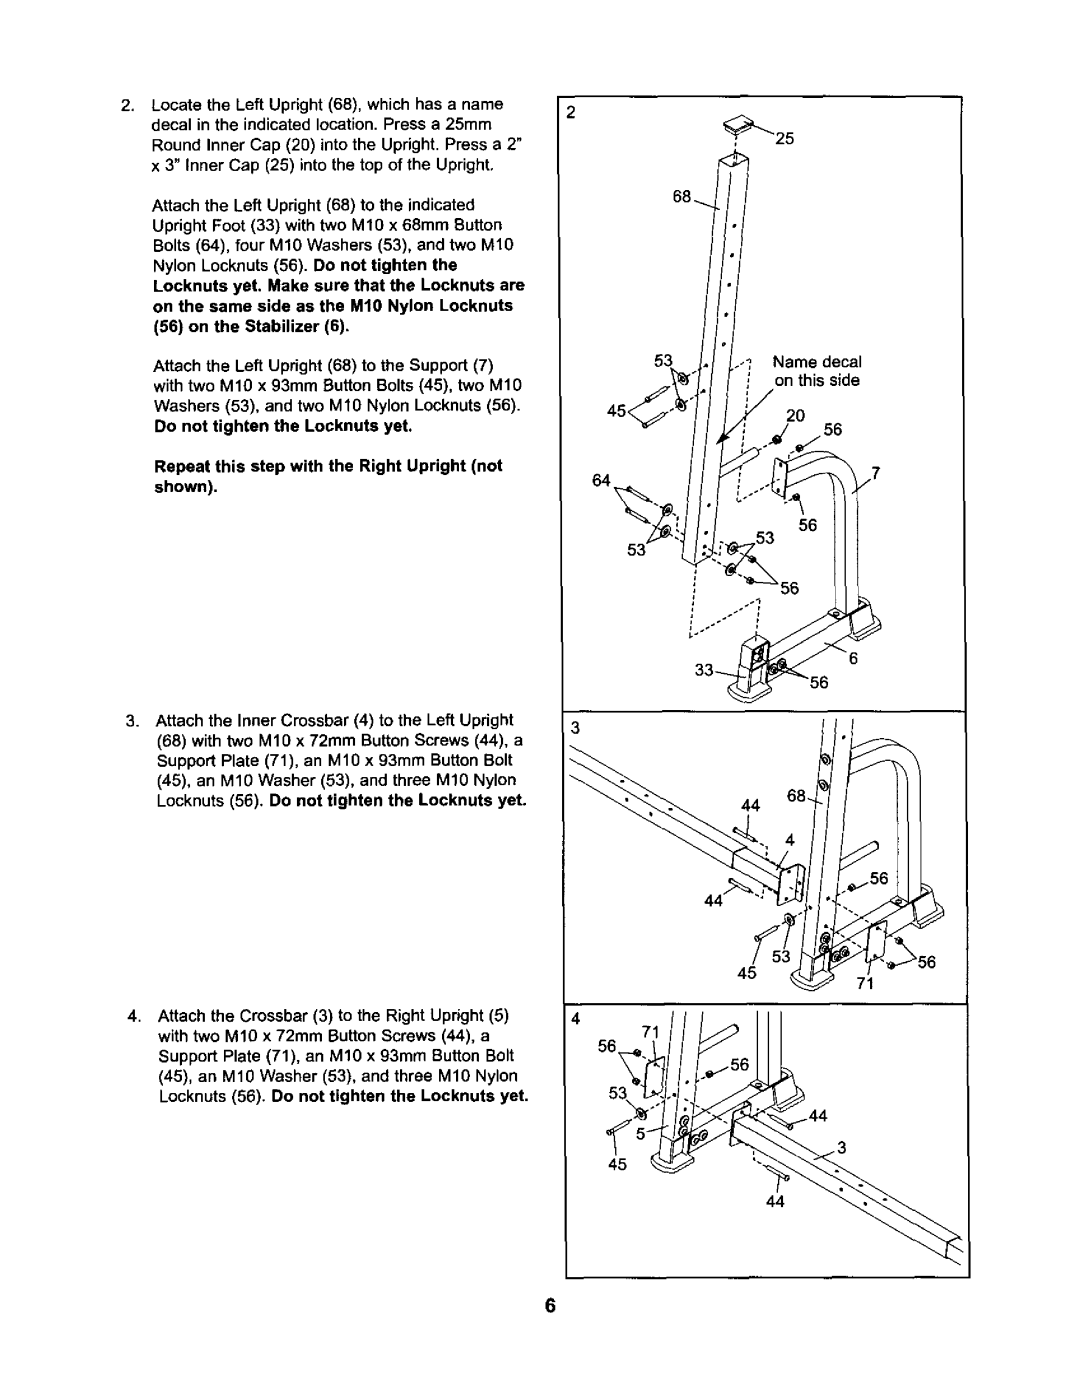 ProForm 831.15032 user manual Repeat this step with the Right Upright not shown 